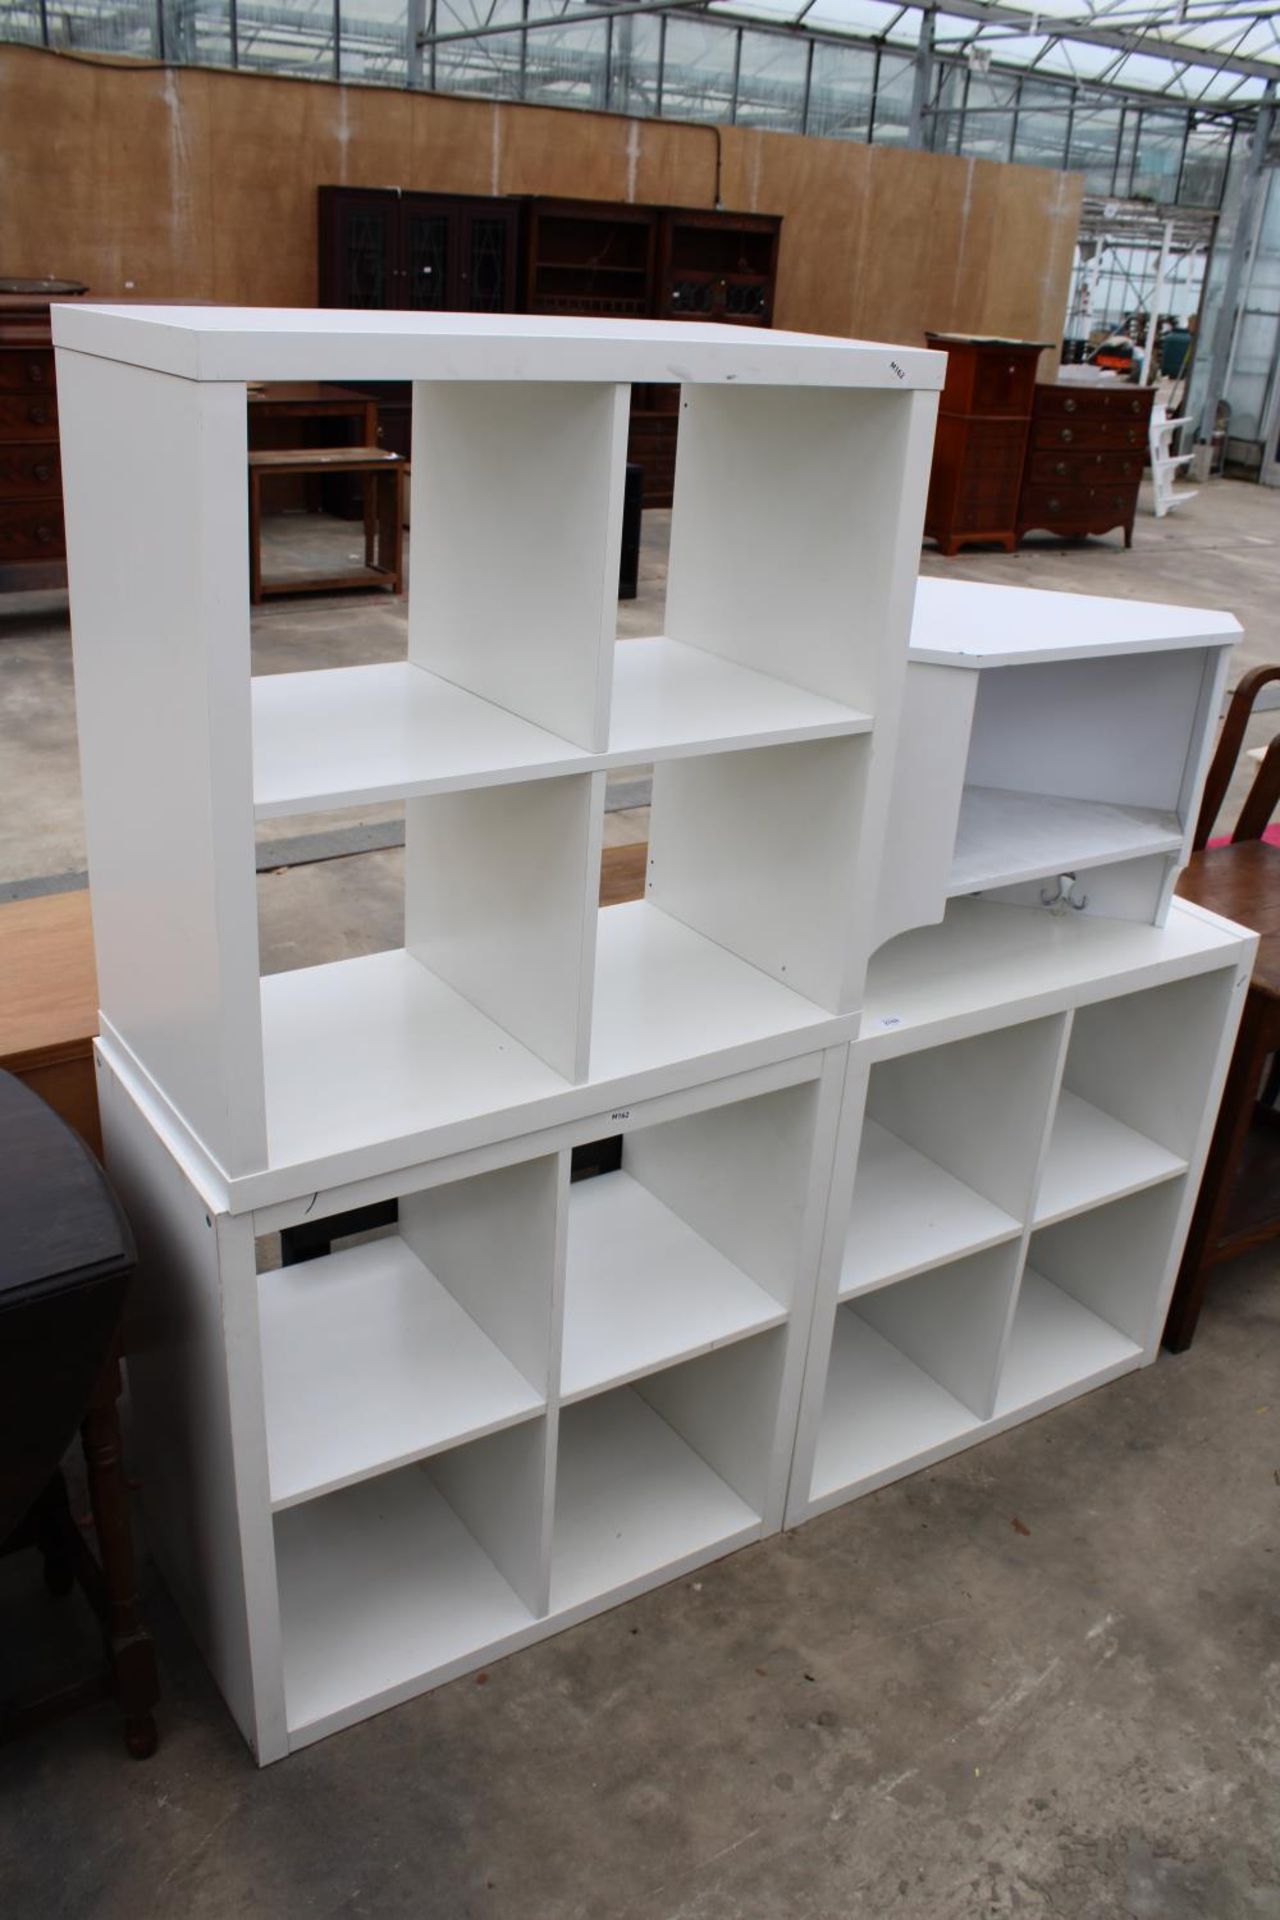 THREE SETS OF WHITE OPEN DISPLAY SHELVES AND A HANGING CORNER UNIT WITH COAT HOOKS